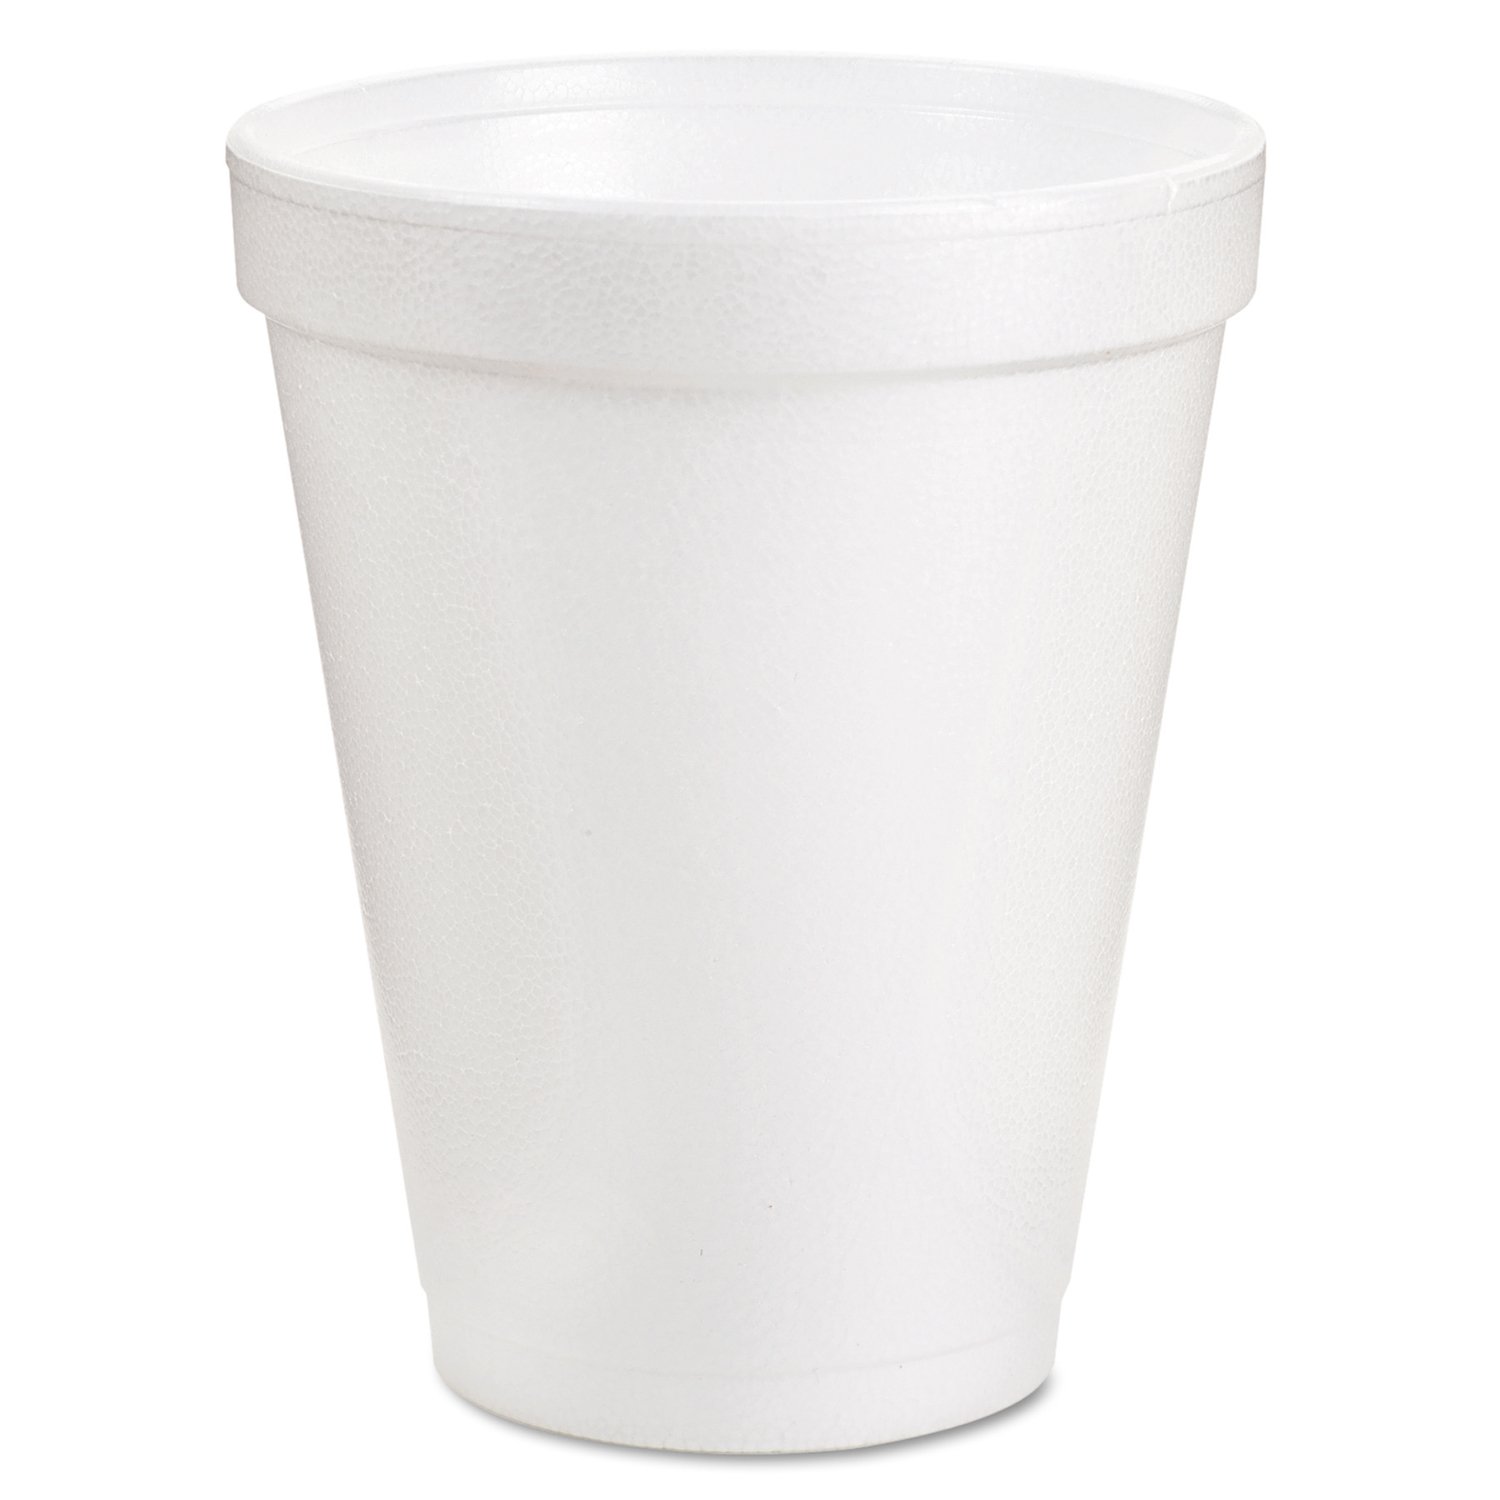 Book Cover Dart Container Corp. 209-8J8 8J8 Foam Cups, 8 oz, White (Pack of 1000) 1000 Count (Pack of 1)